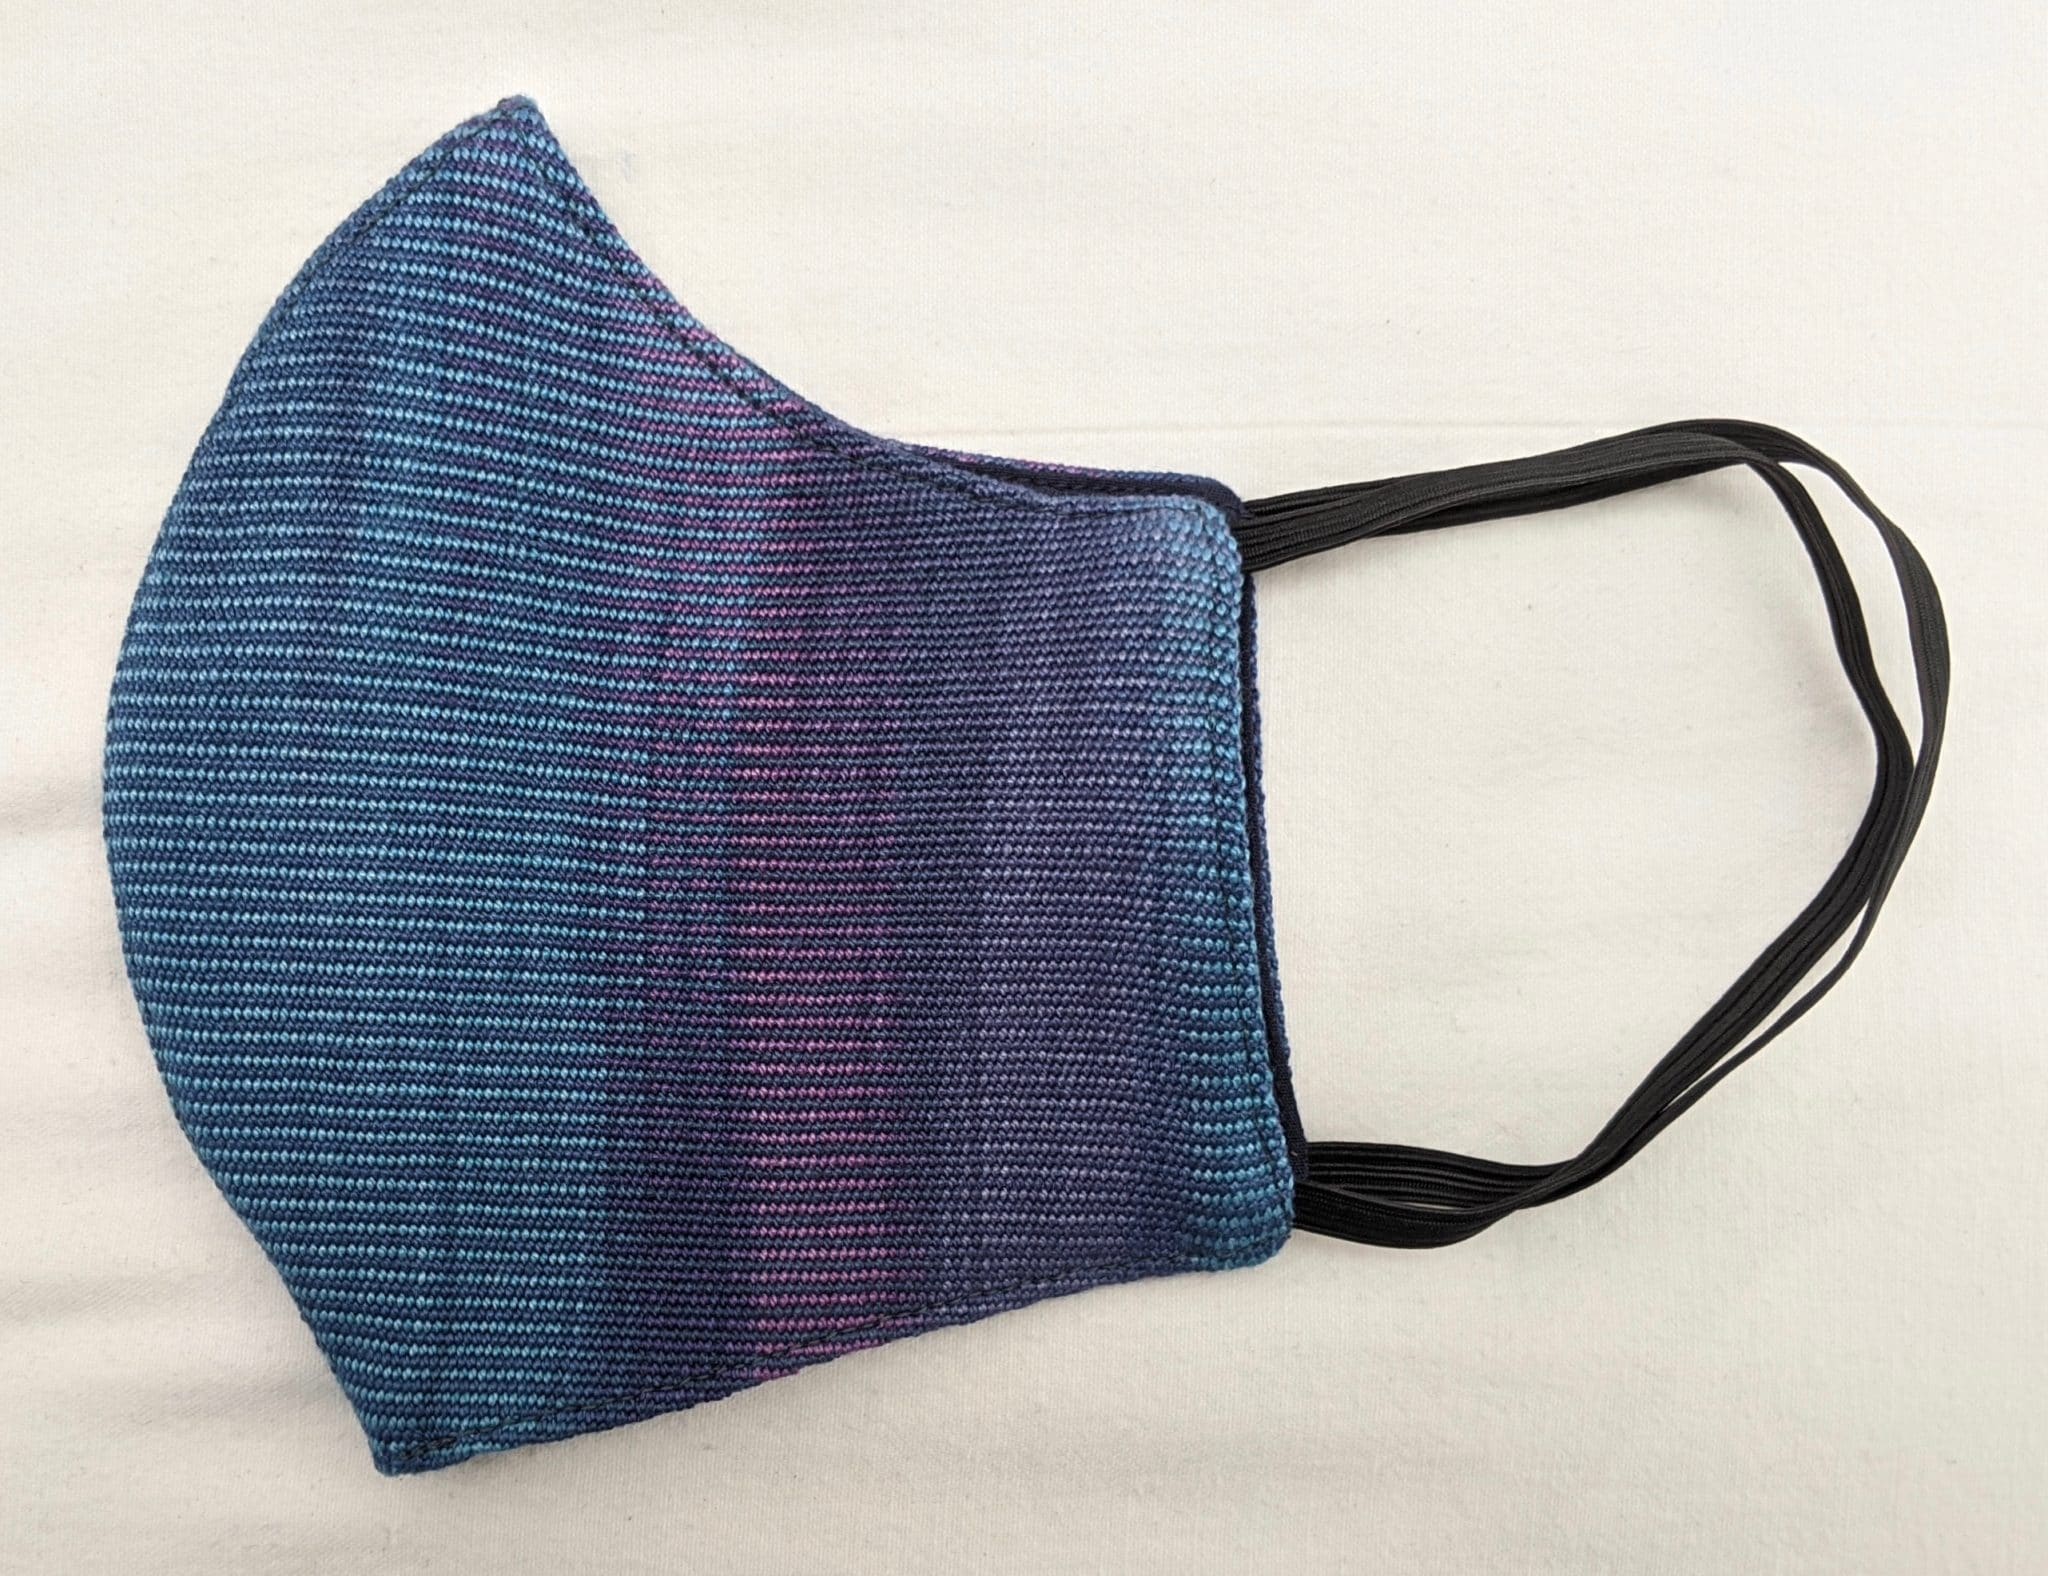 Handwoven Lightweight Bamboo Face Mask with Elastic Behind Ears - Blues, Purples